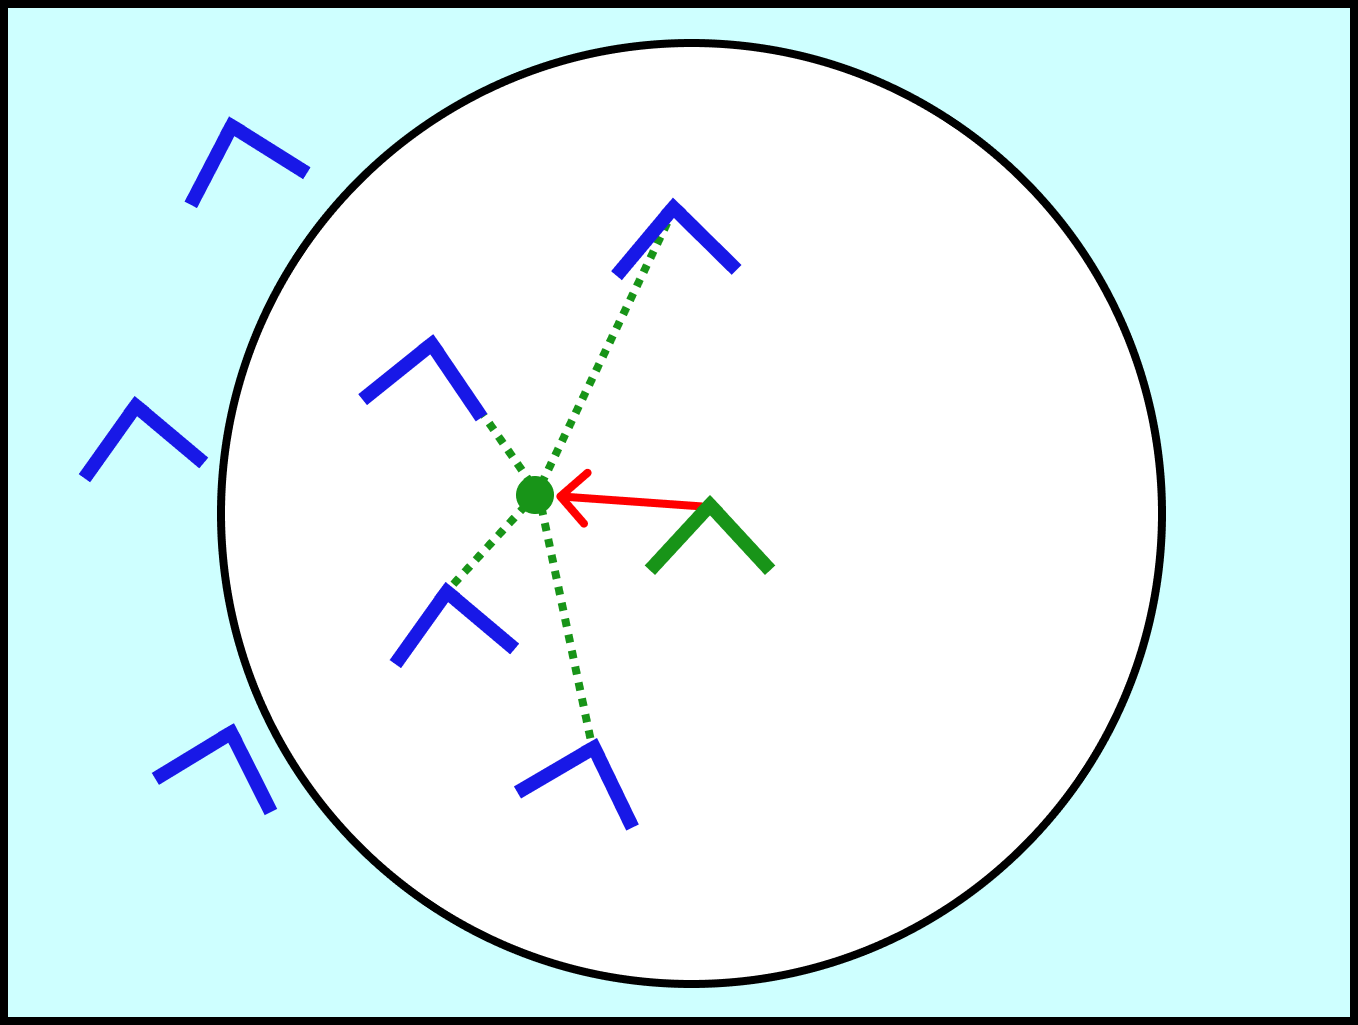 Our boid has a red arrow pointing to a green point in space. There are lines from the other boids that lead to this average center.